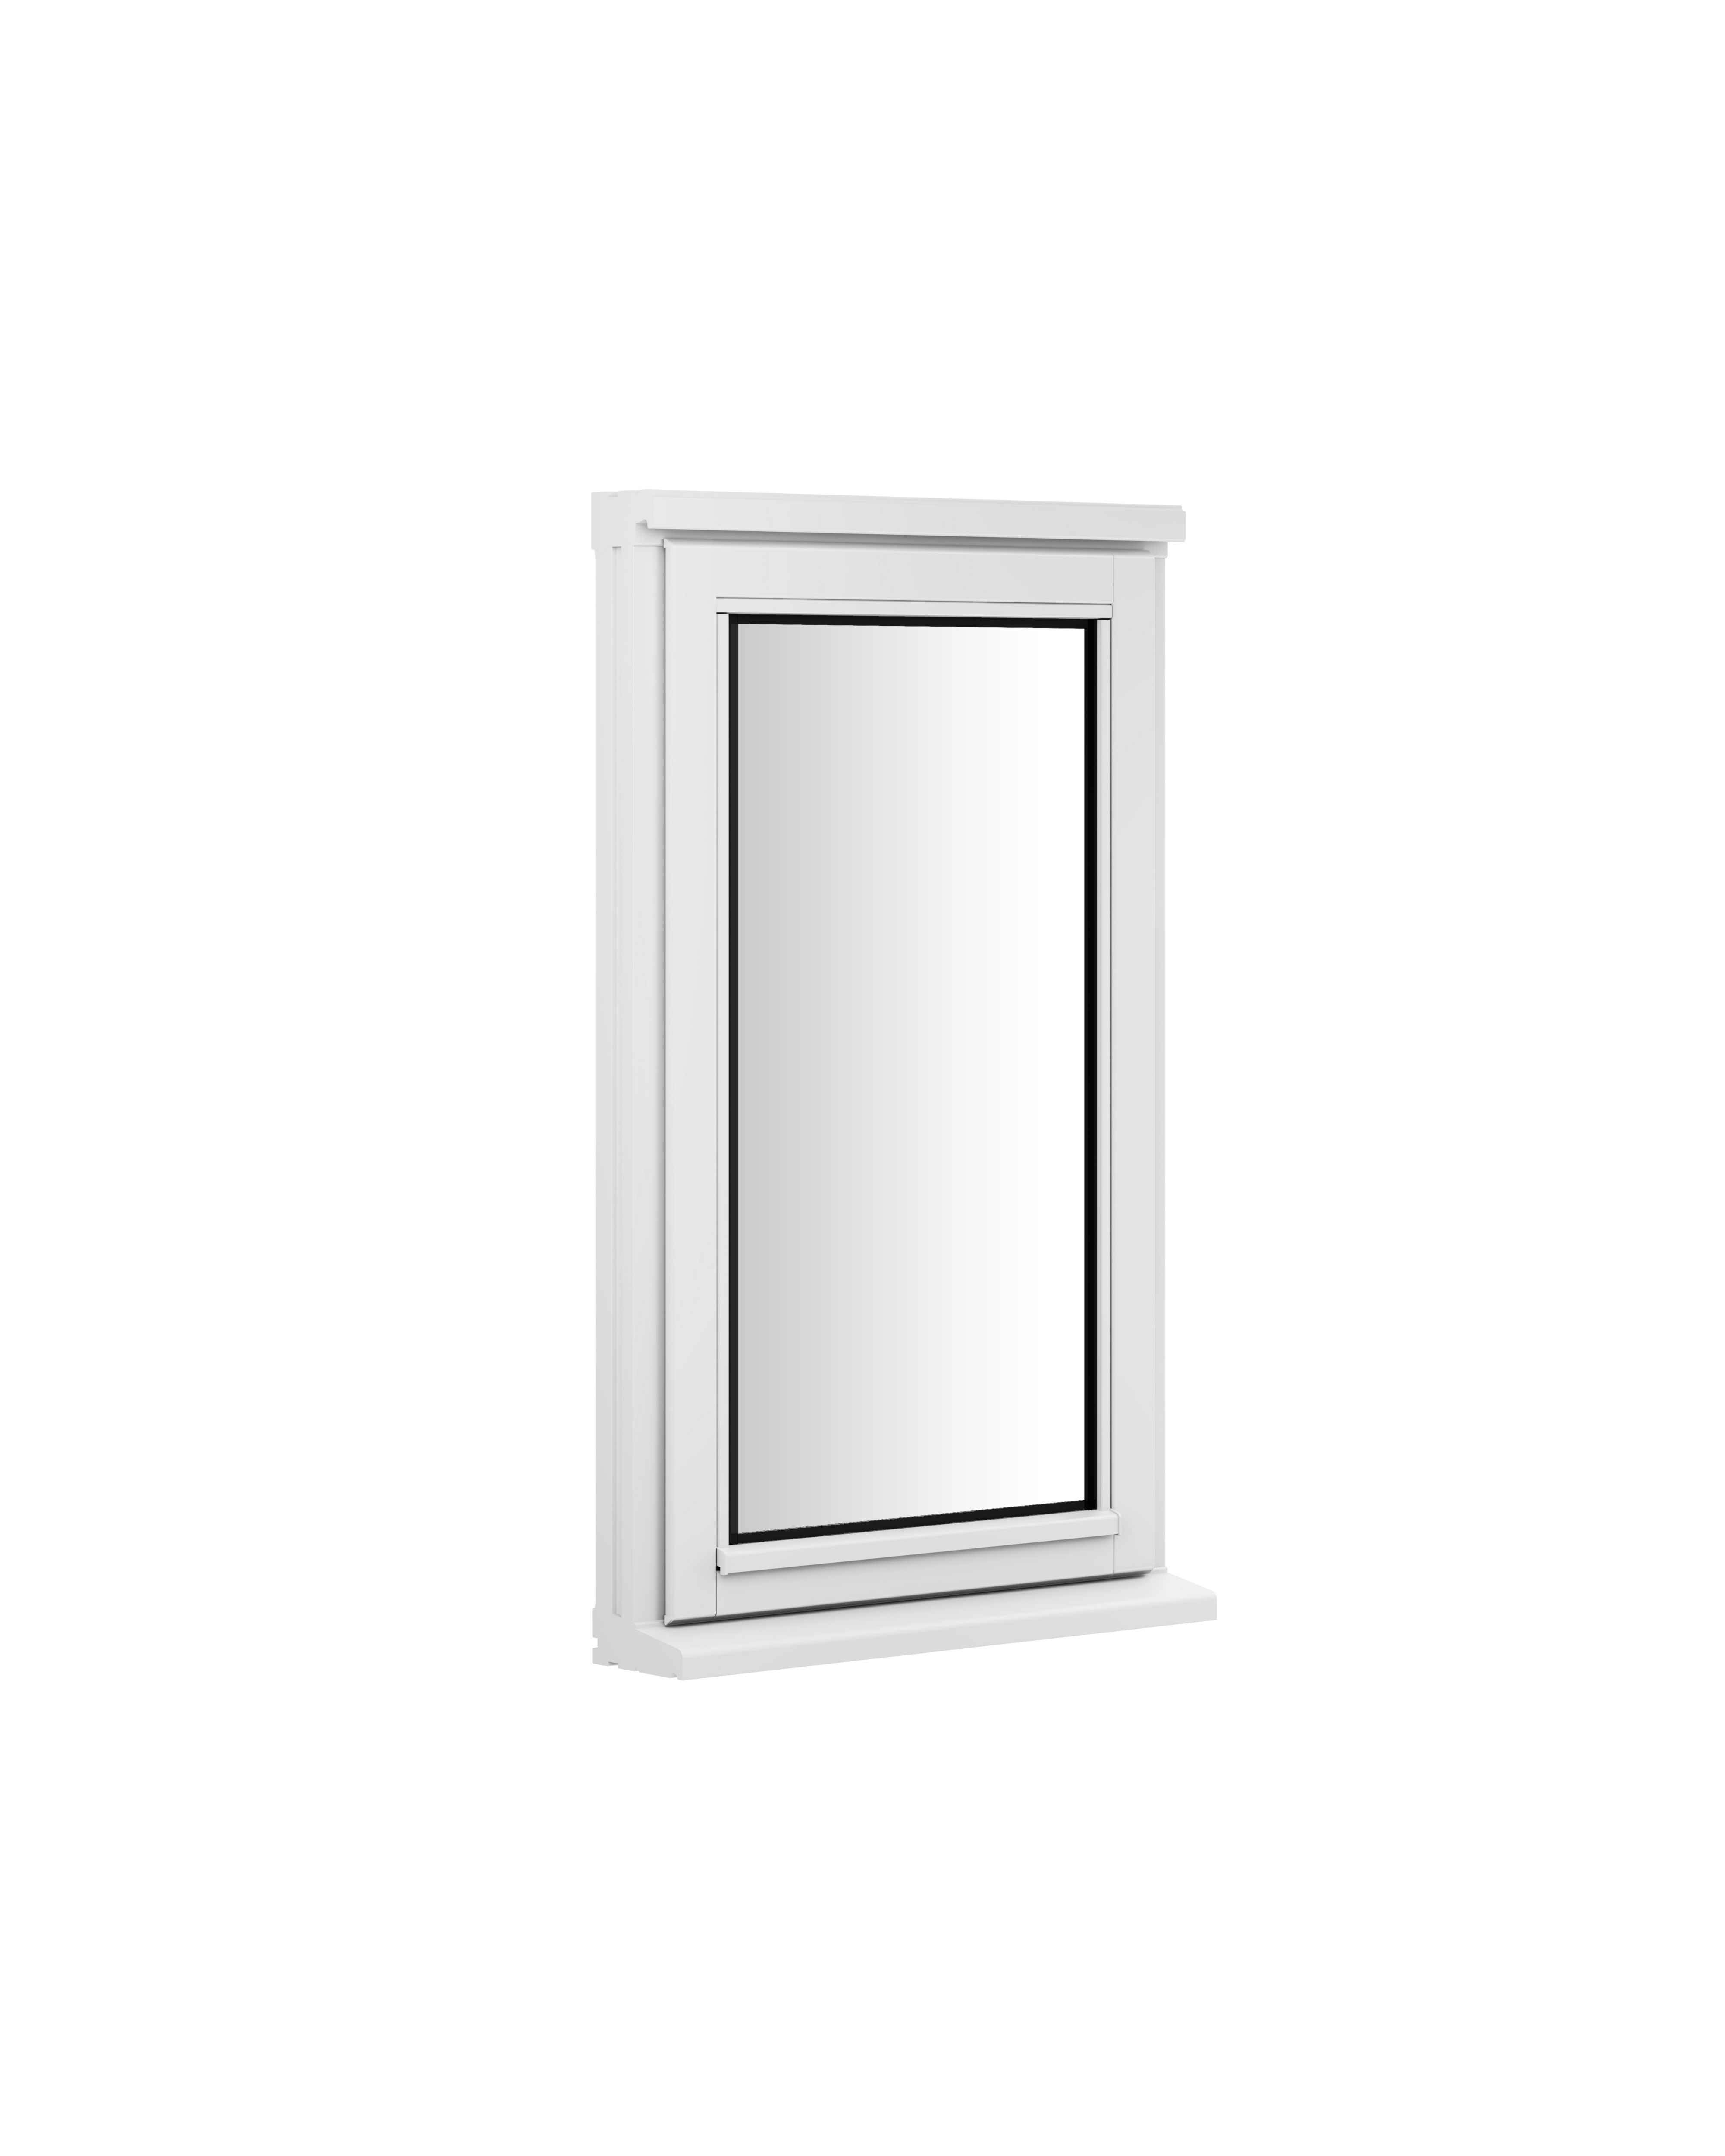 GoodHome Clear Double glazed White Left-handed Window, (H)1195mm (W)625mm